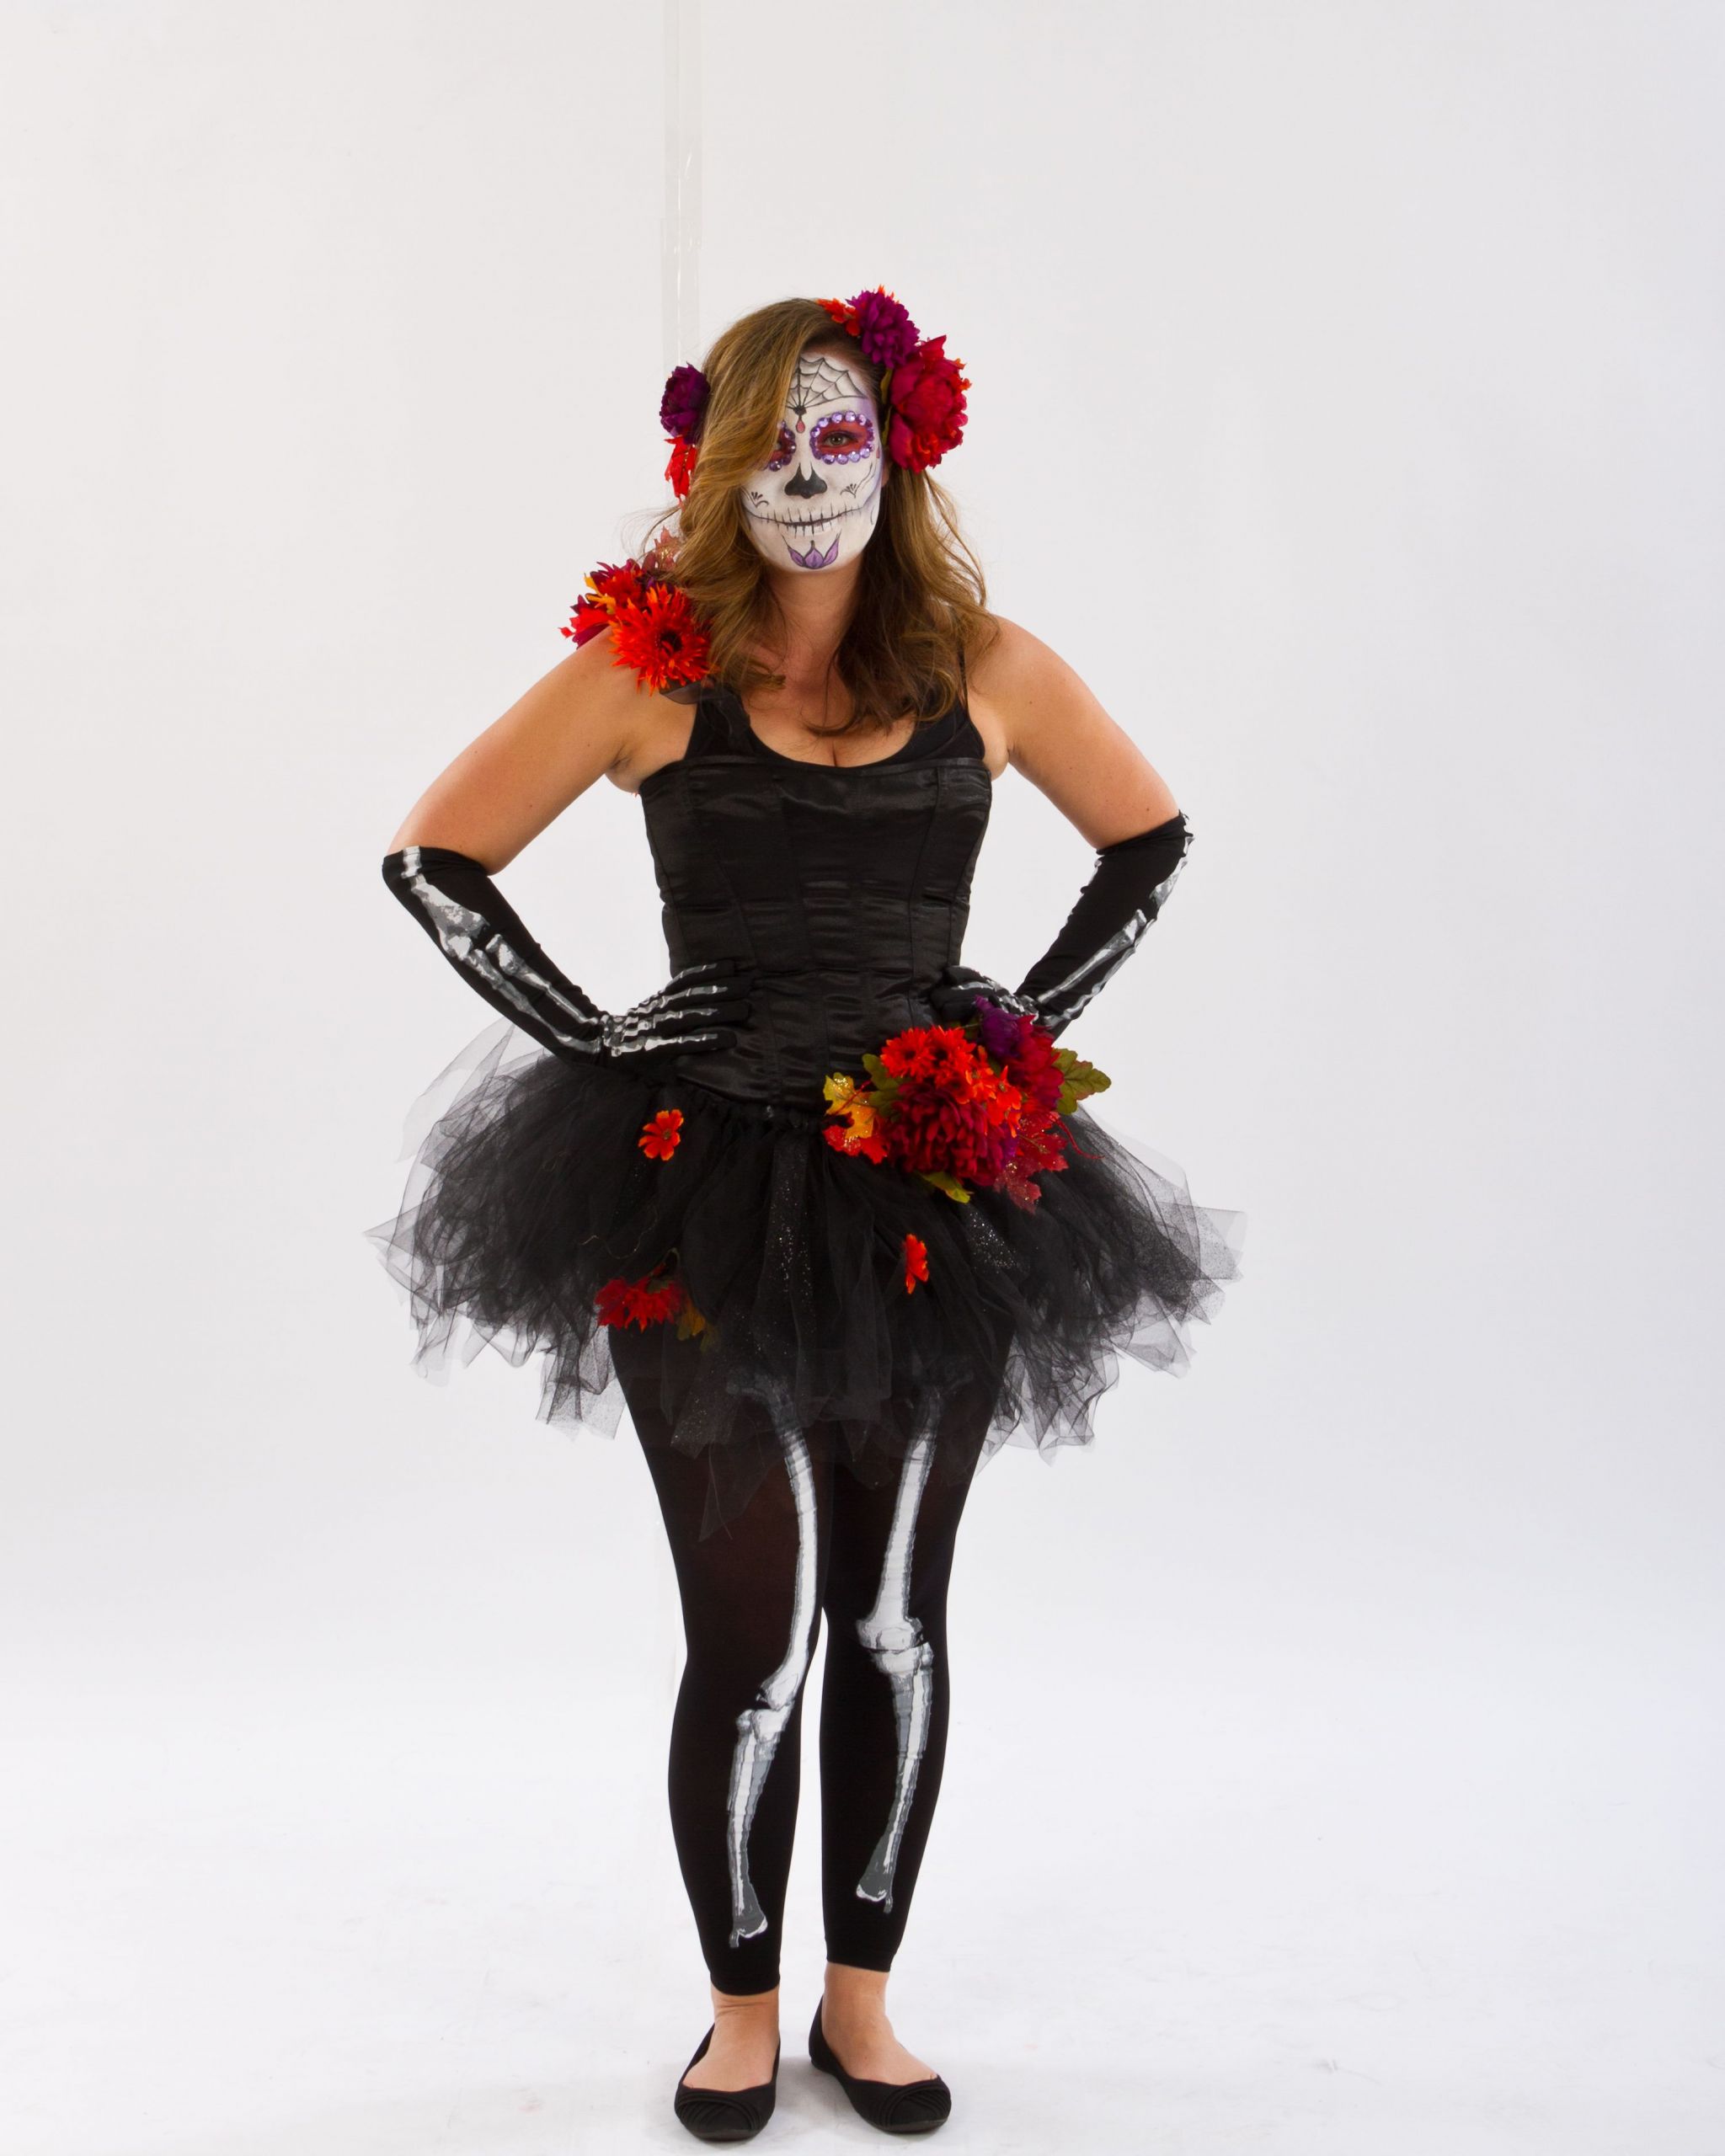 DIY Day Of The Dead Costumes
 To for DIY Day of the Dead costume starting with